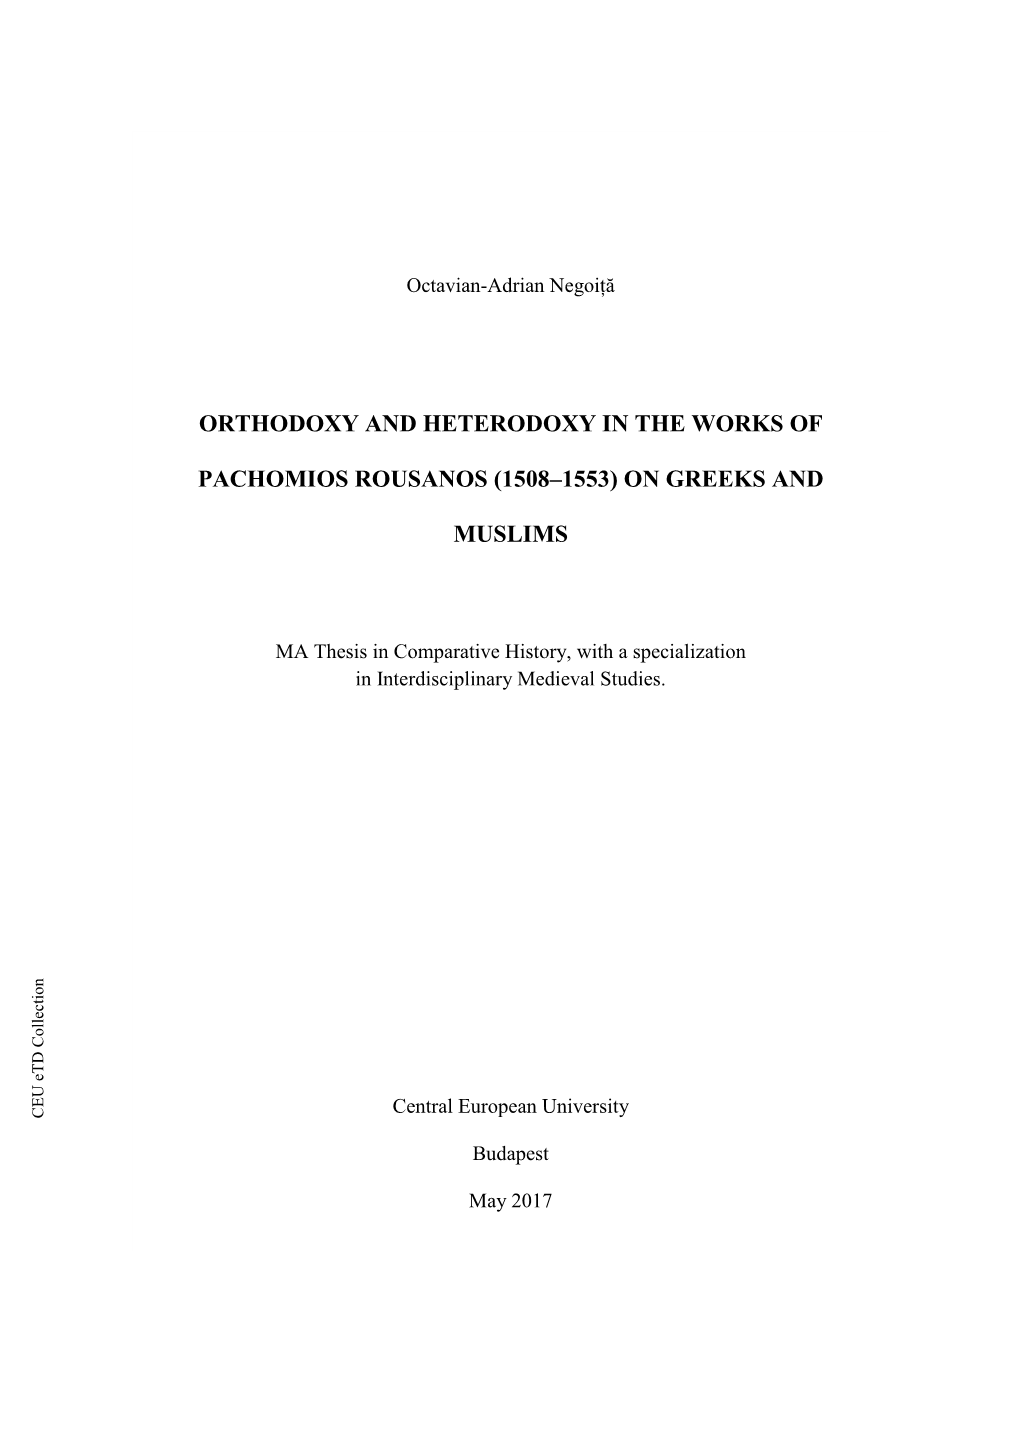 Orthodoxy and Heterodoxy in the Works Of